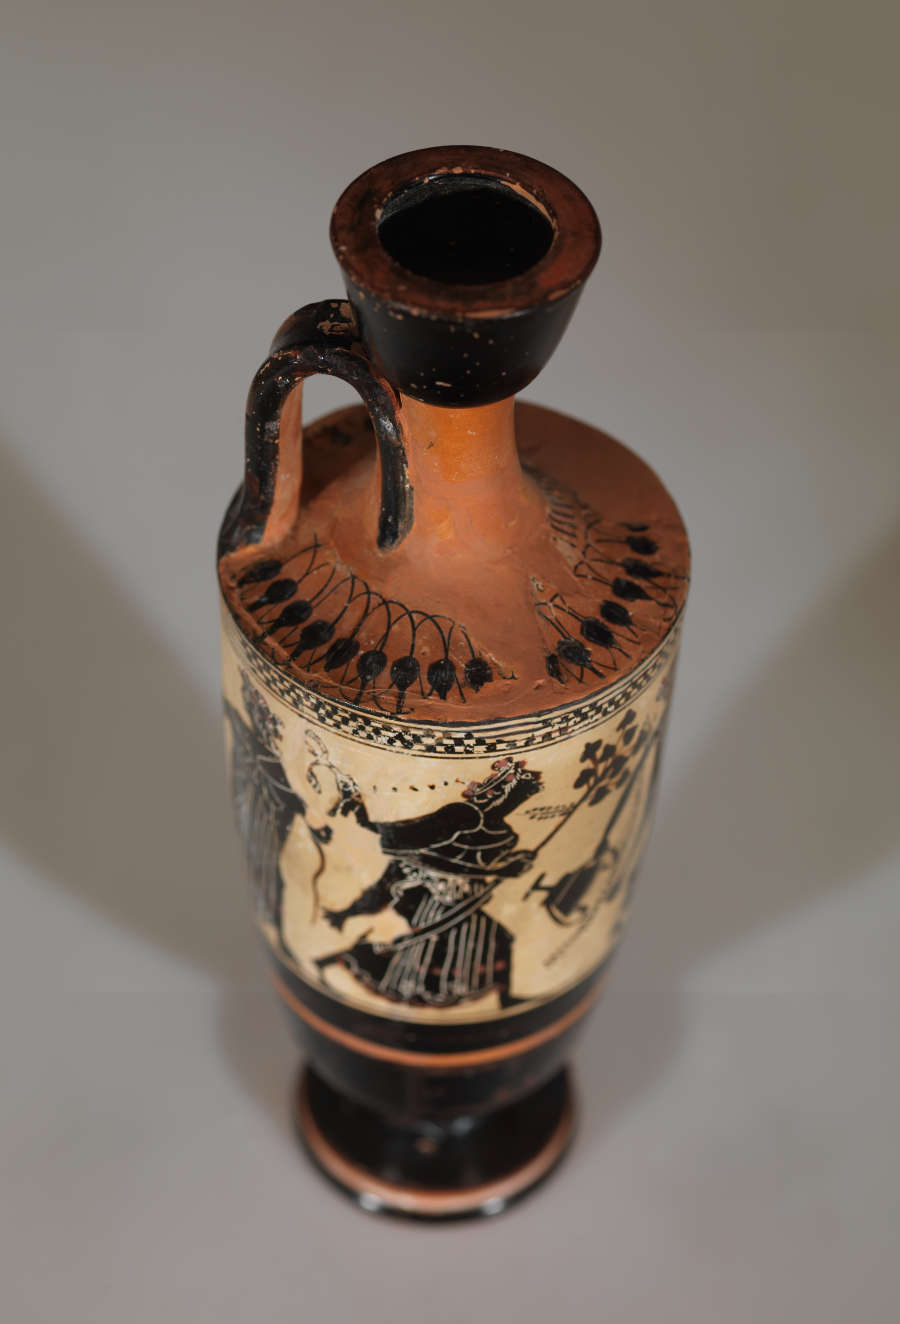 Angled top-view of a black and orange vase with illustrations of animals and figures. Highlighted is the vase’s thin orange fluted neck which has black floral motifs on its base.